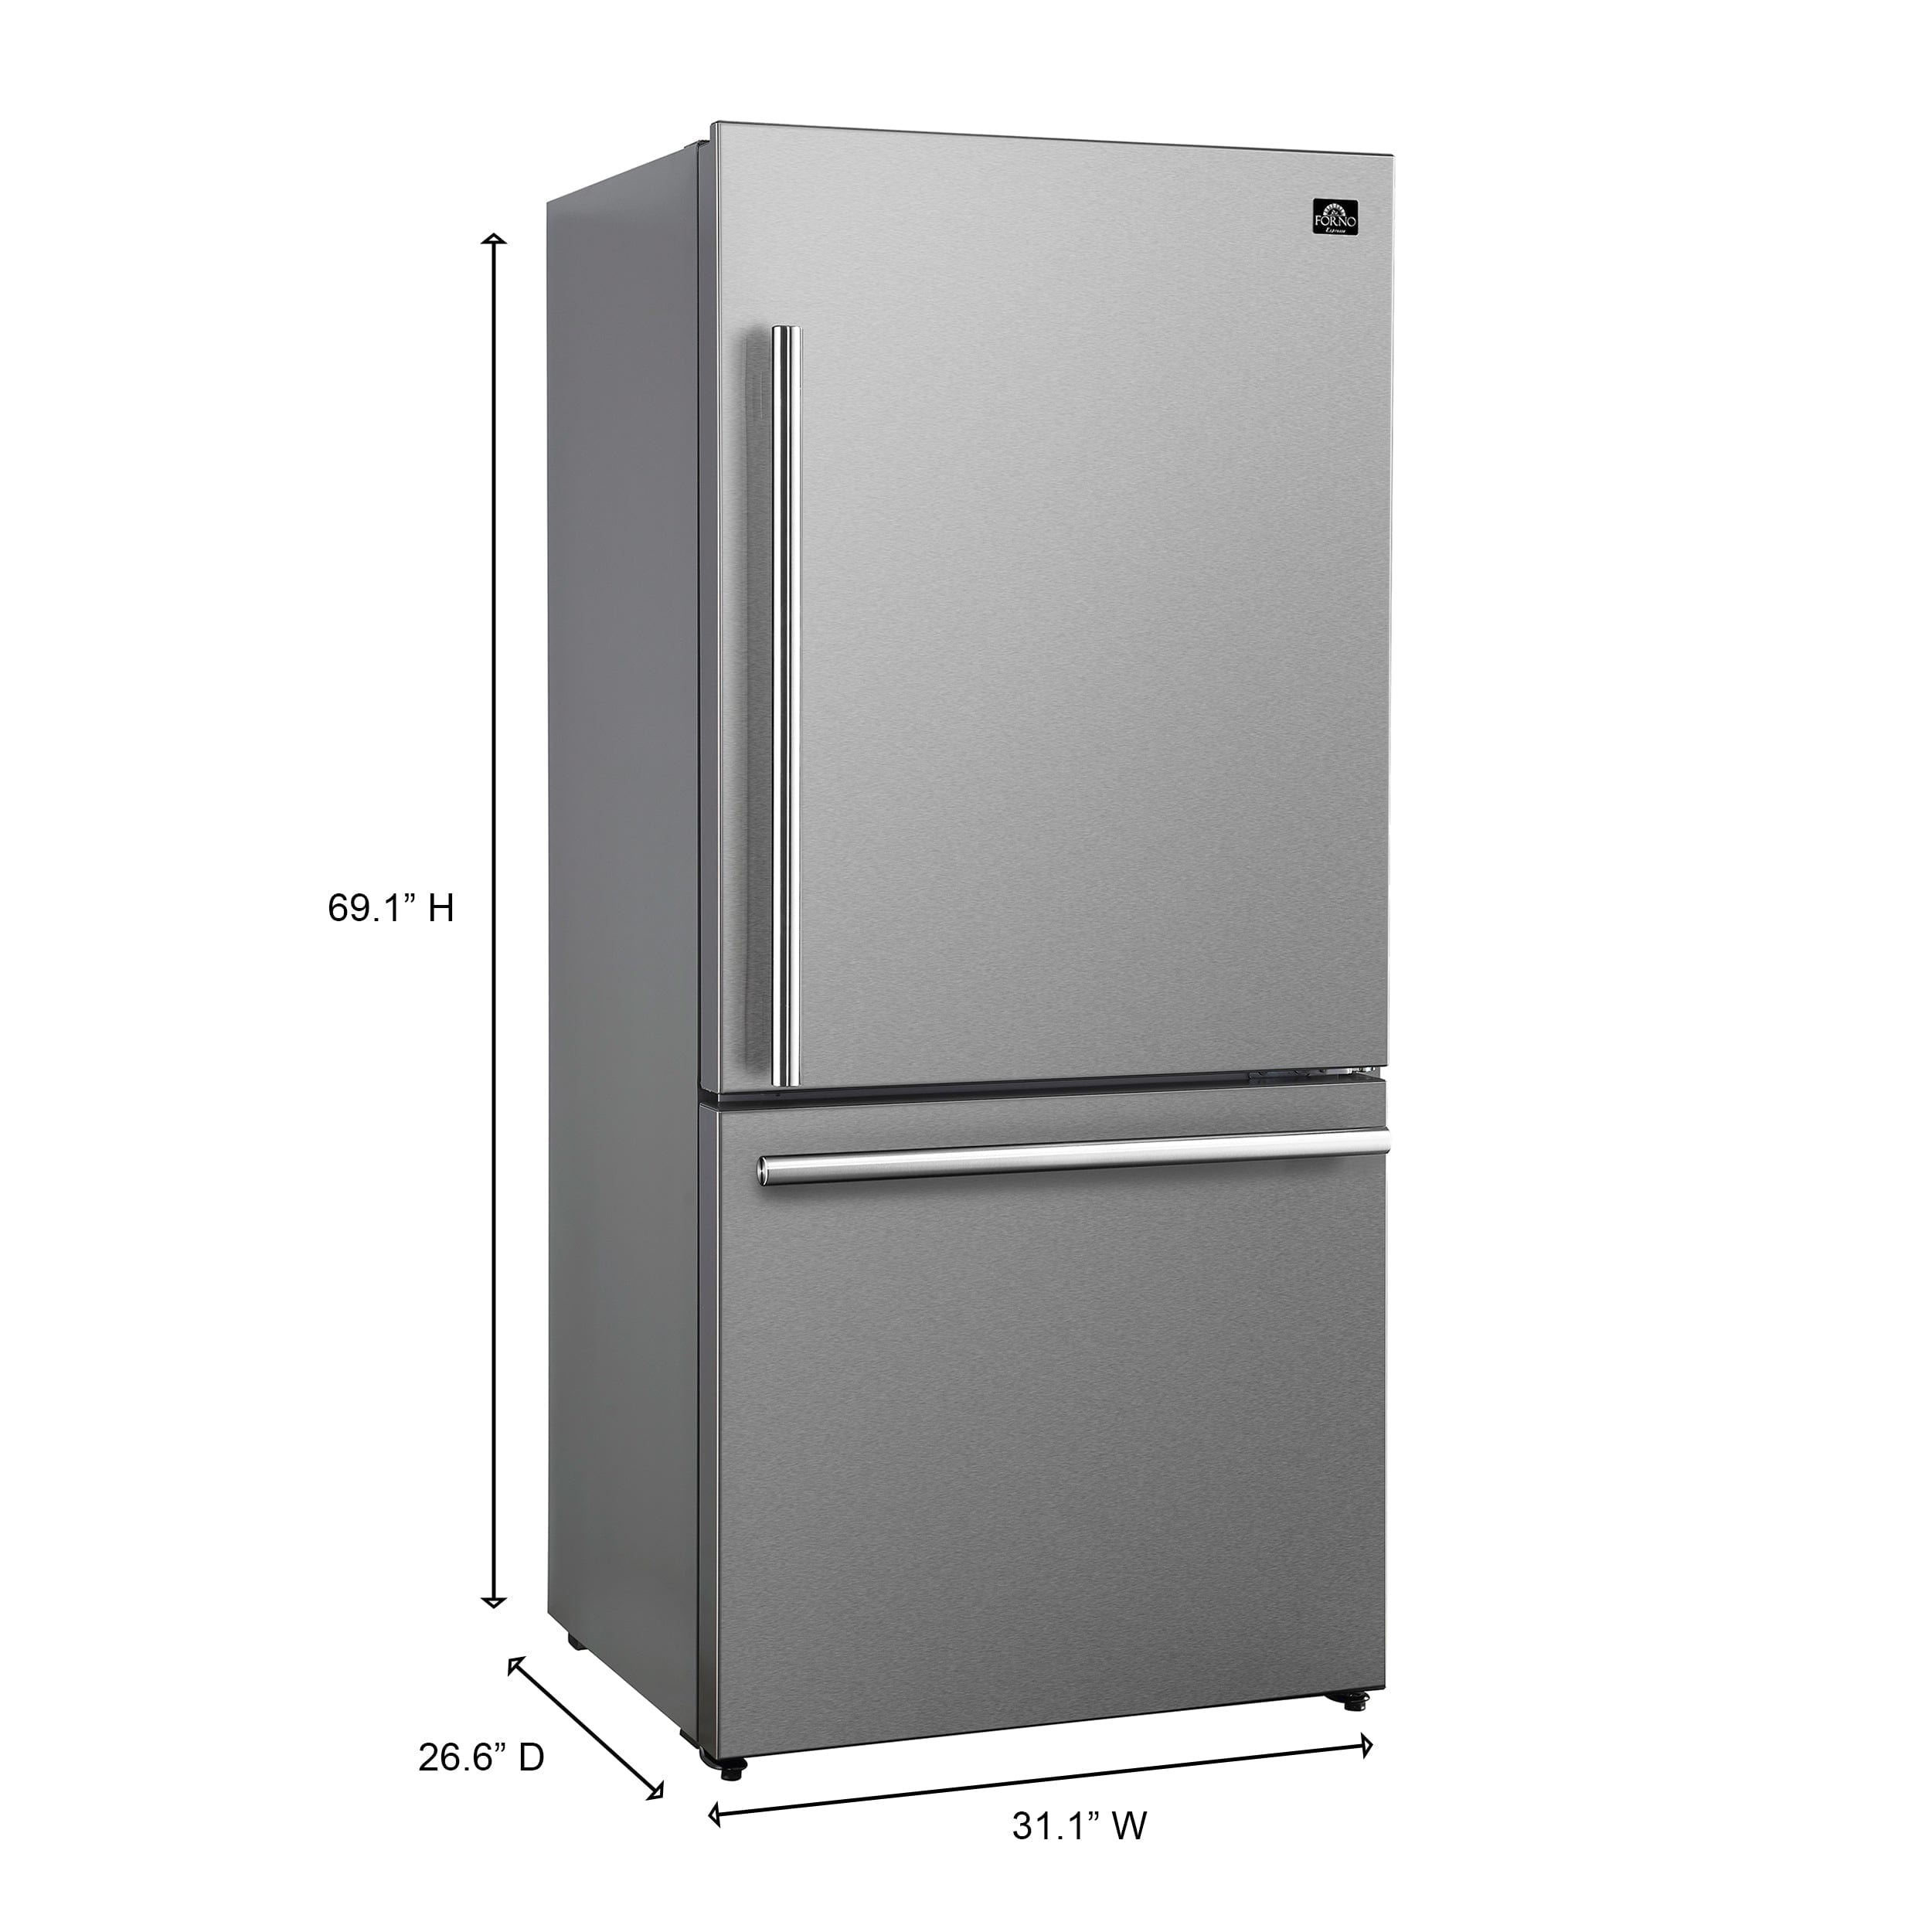 Forno Milano Espresso 31-Inch 17.2 cu. ft. Bottom Freezer Right Swing Door Refrigerator in Stainless Steel with Brass Handle  (FFFFD1785-31S) Wine Coolers Empire